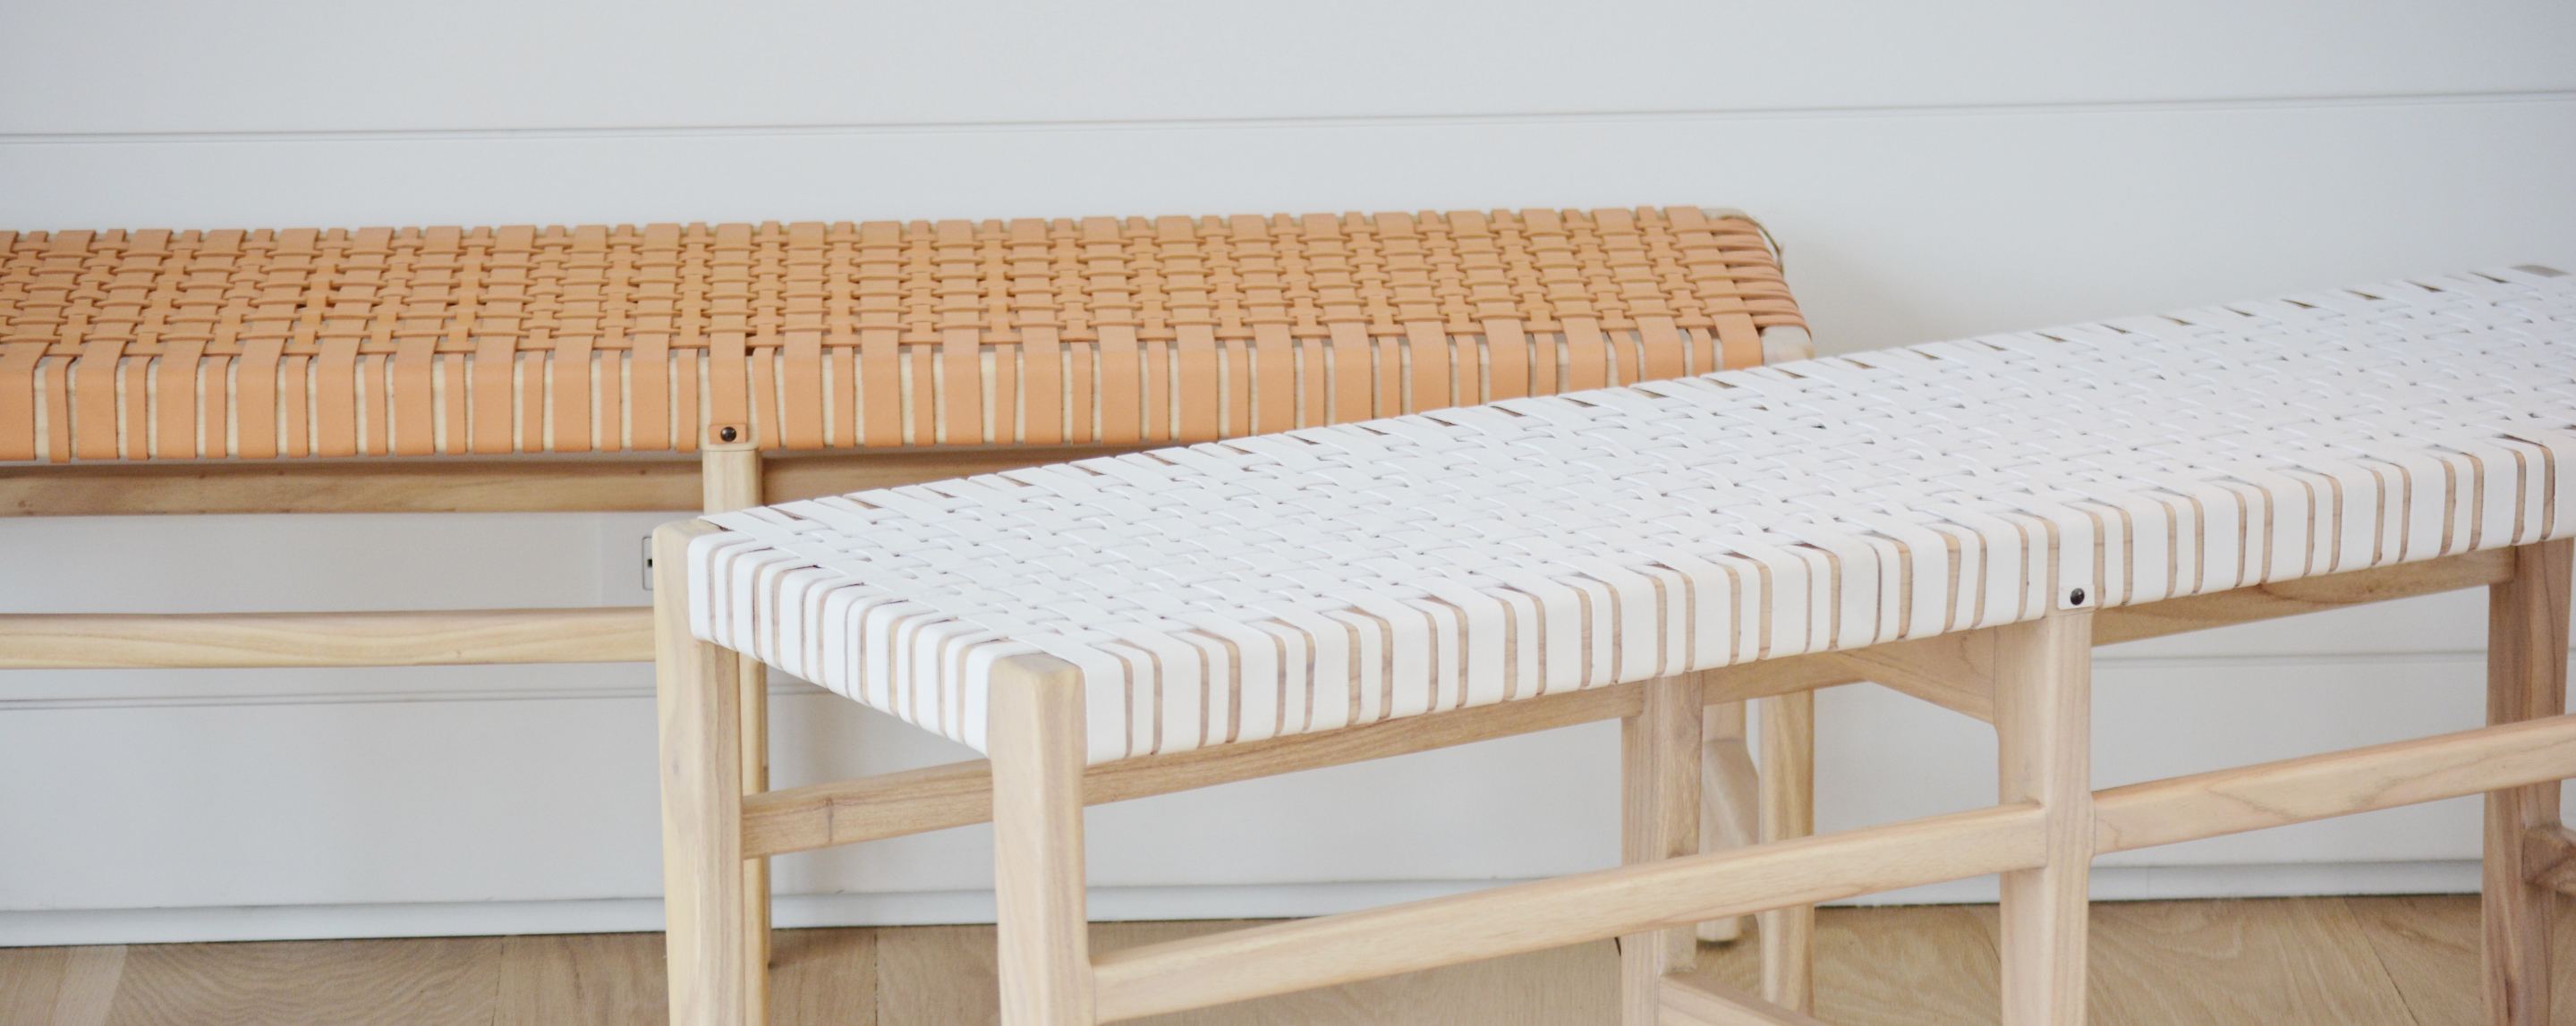 woven leather luggage bench